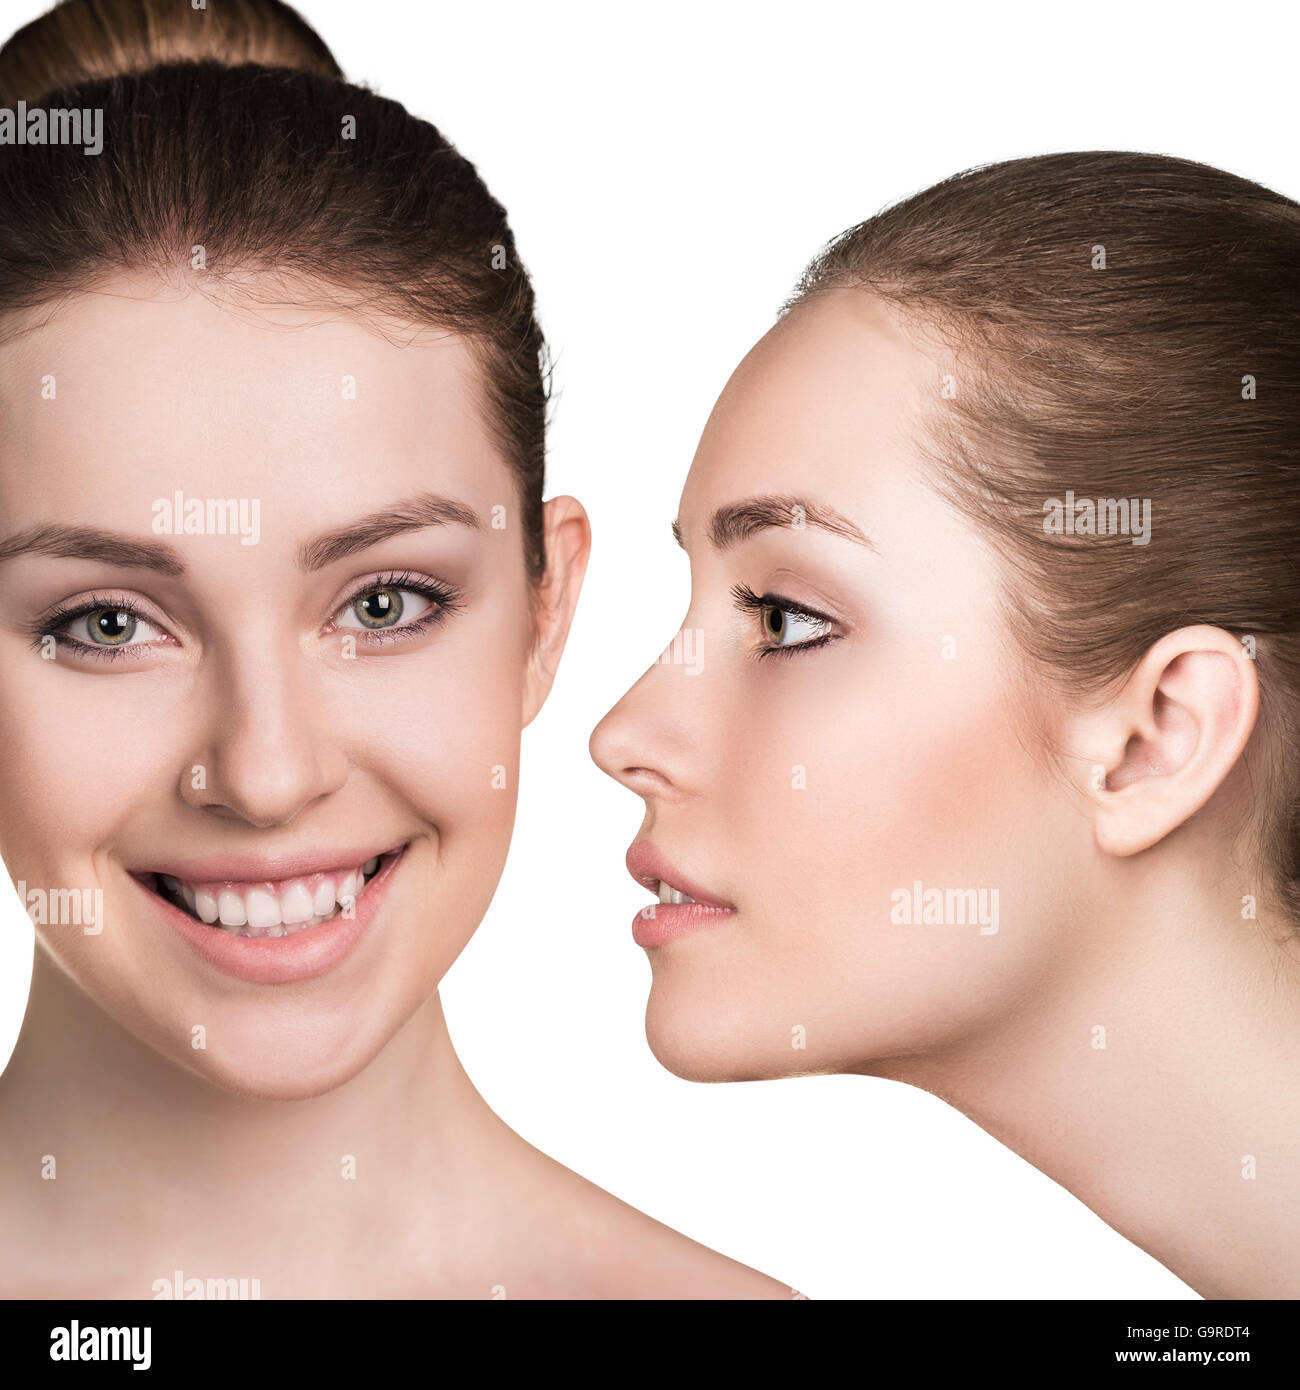 Young Woman With Perfect Fresh Skin Stock Photo Alamy